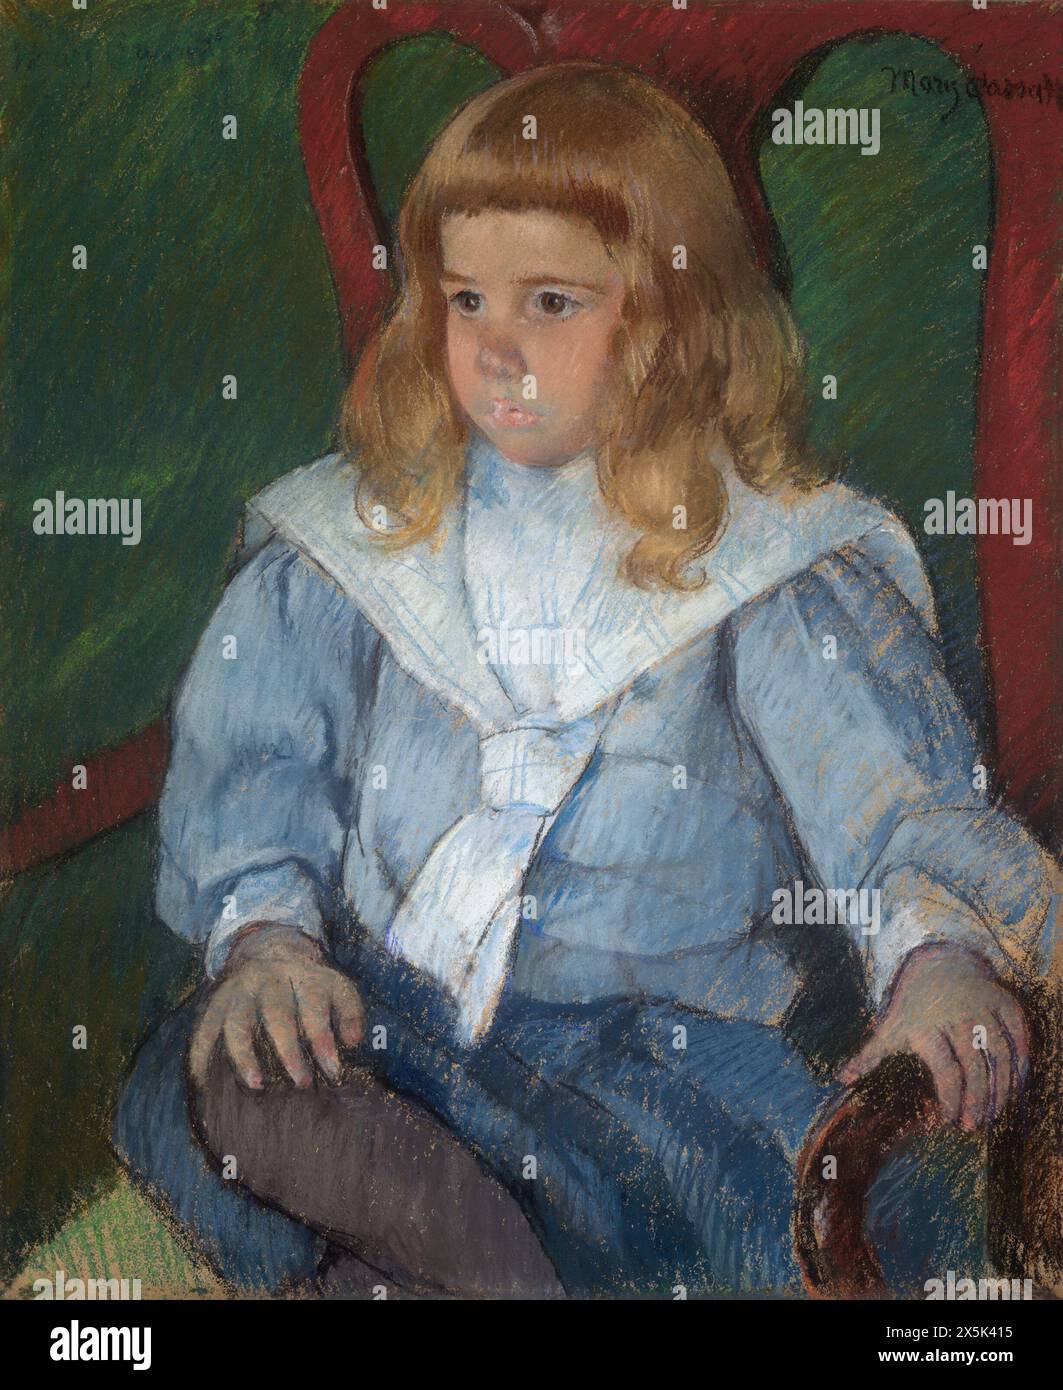 Painting by american artist Mary Cassatt (1844-1926) Boy with Golden Curls (Portrait of Harris Whittemore, Jr., B.A. 1918) (1898) Stock Photo